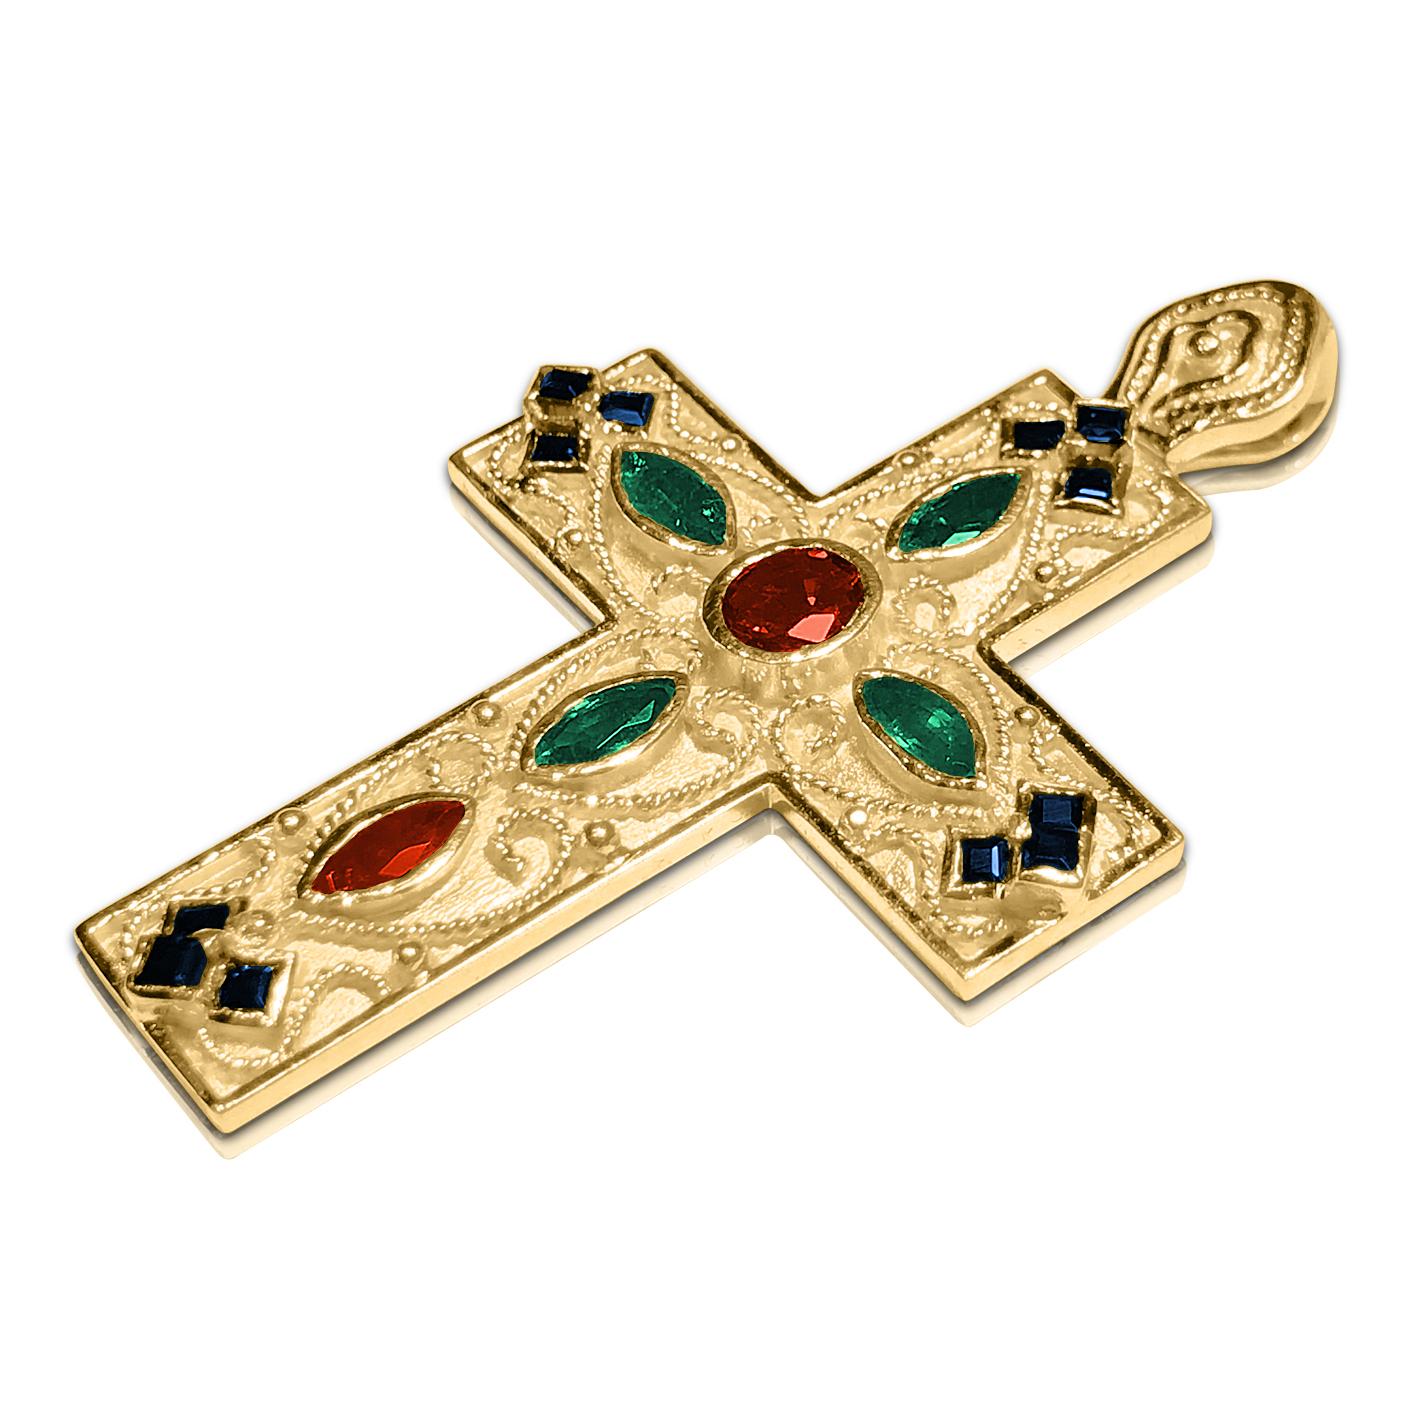 This S.Georgios Designer Byzantine Style Cross Pendant Enhancer is handmade from solid 18 Karat Yellow Gold and features 2 Rubies, 4 Emeralds, and 12 Sapphire all total weight of 2,94 Carat. This stunning art piece is made as an inspiration from the